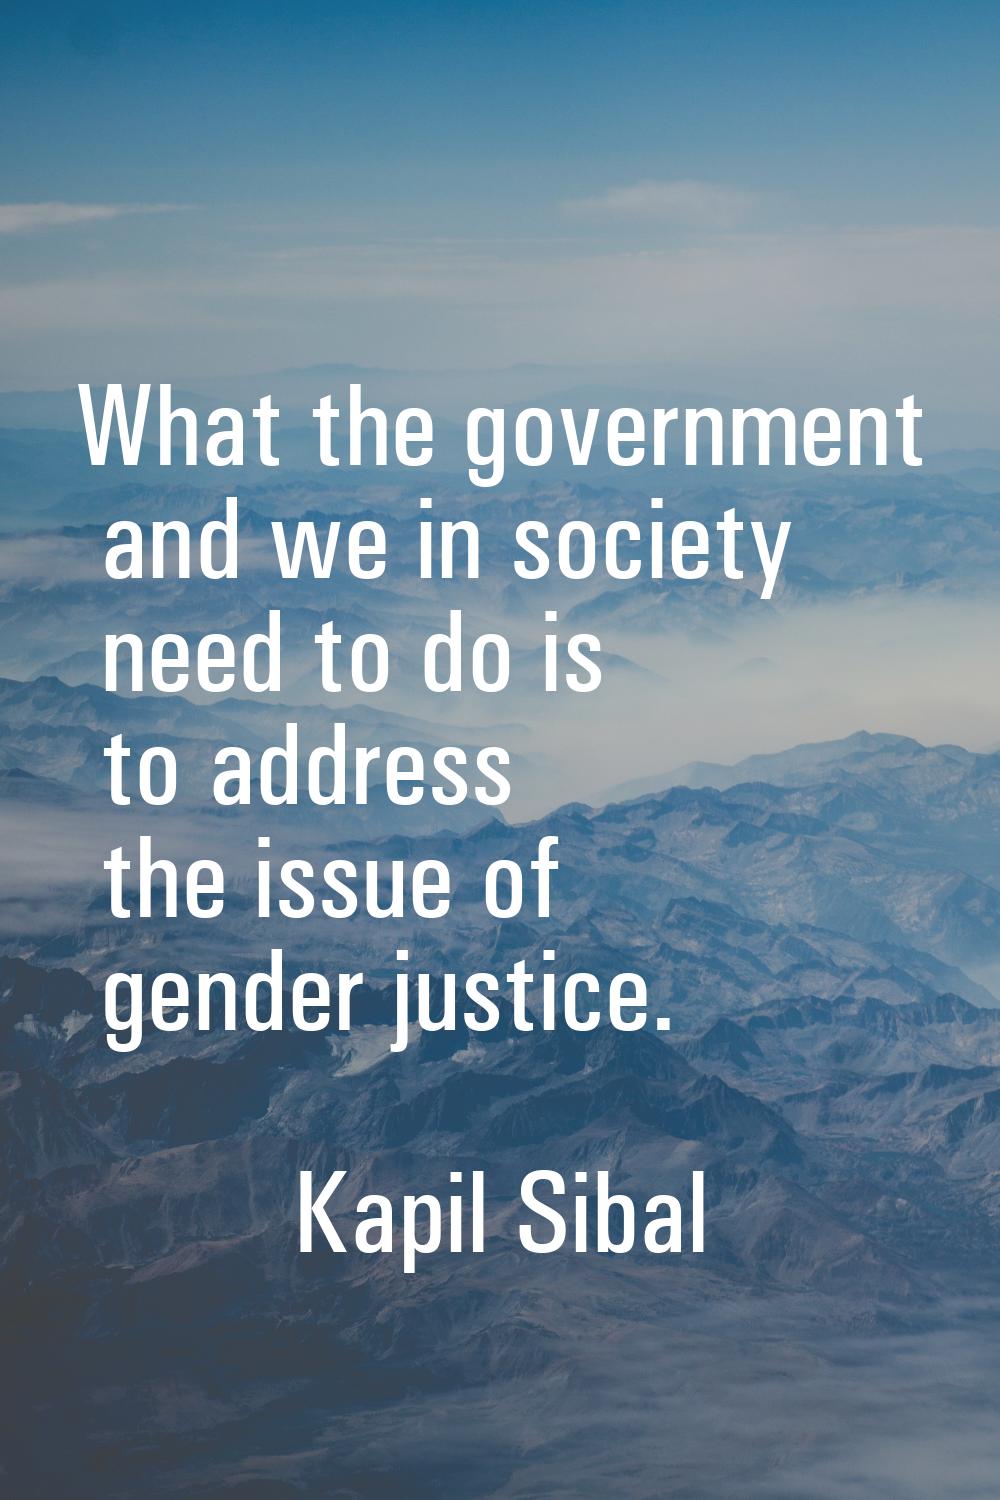 What the government and we in society need to do is to address the issue of gender justice.